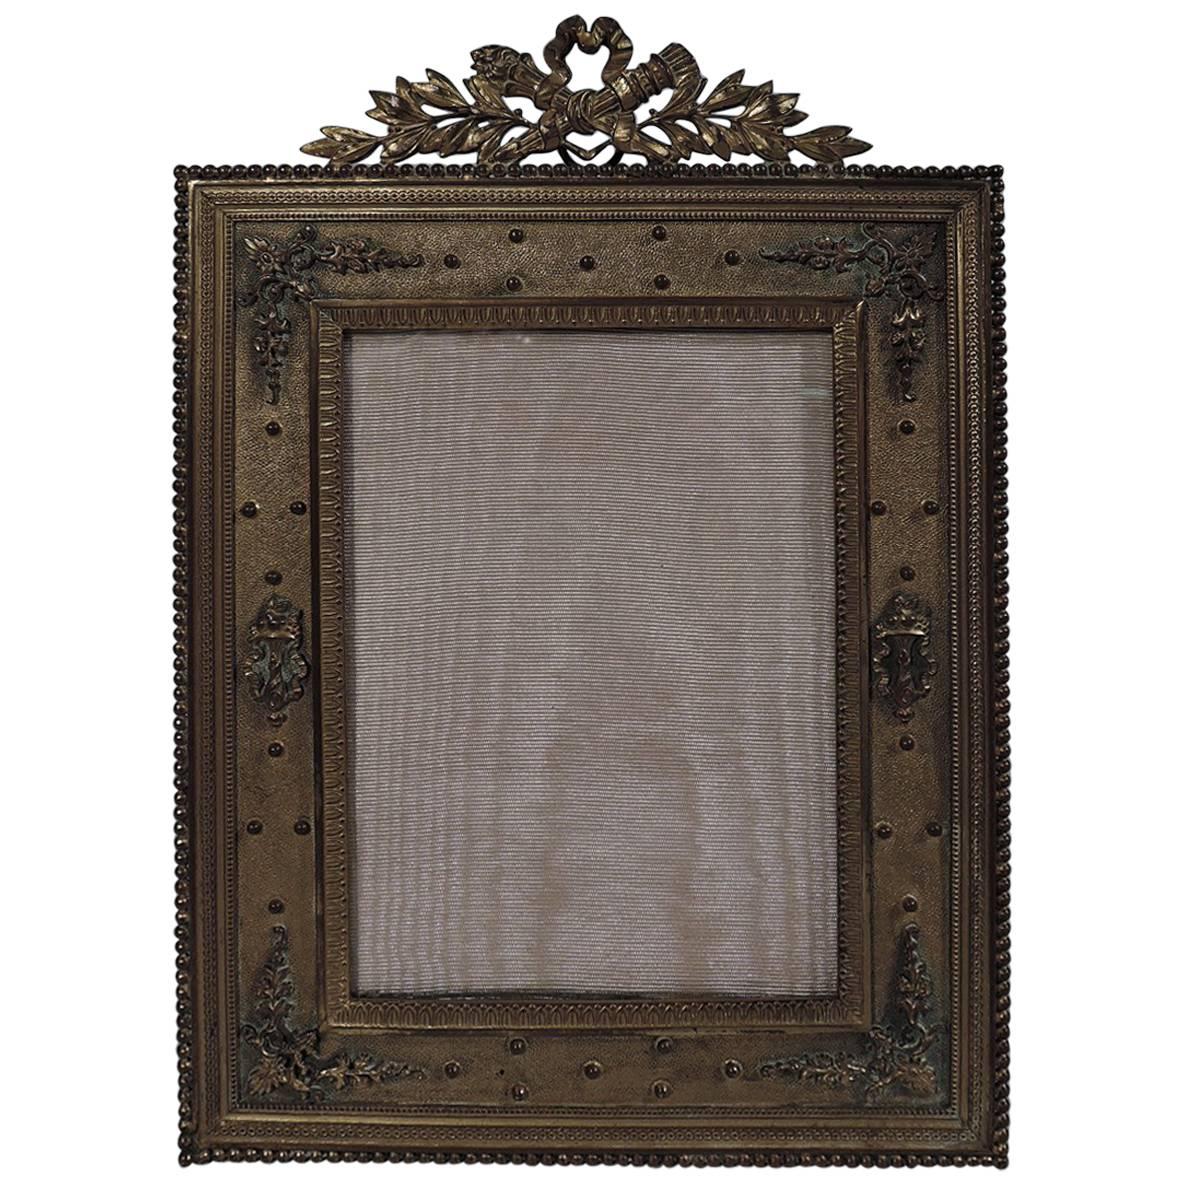 Antique French Rococo Revival Gilt Bronze Picture Frame